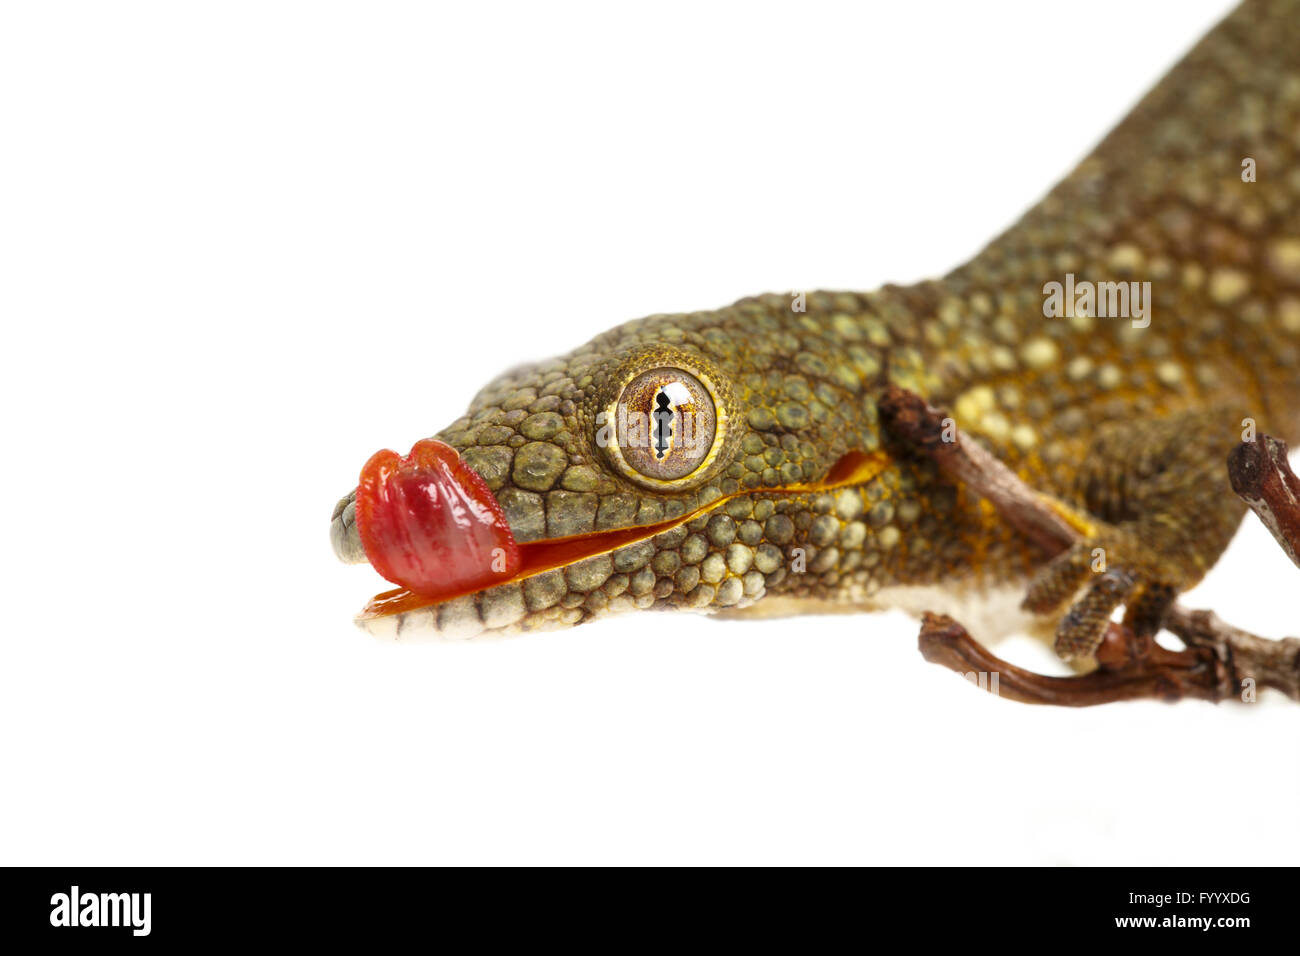 Prehensile-Tailed Gecko, or Bauer's Chameleon Gecko, Eurydactylodes agricolae, licking lips. New Caledonia (captive) Stock Photo